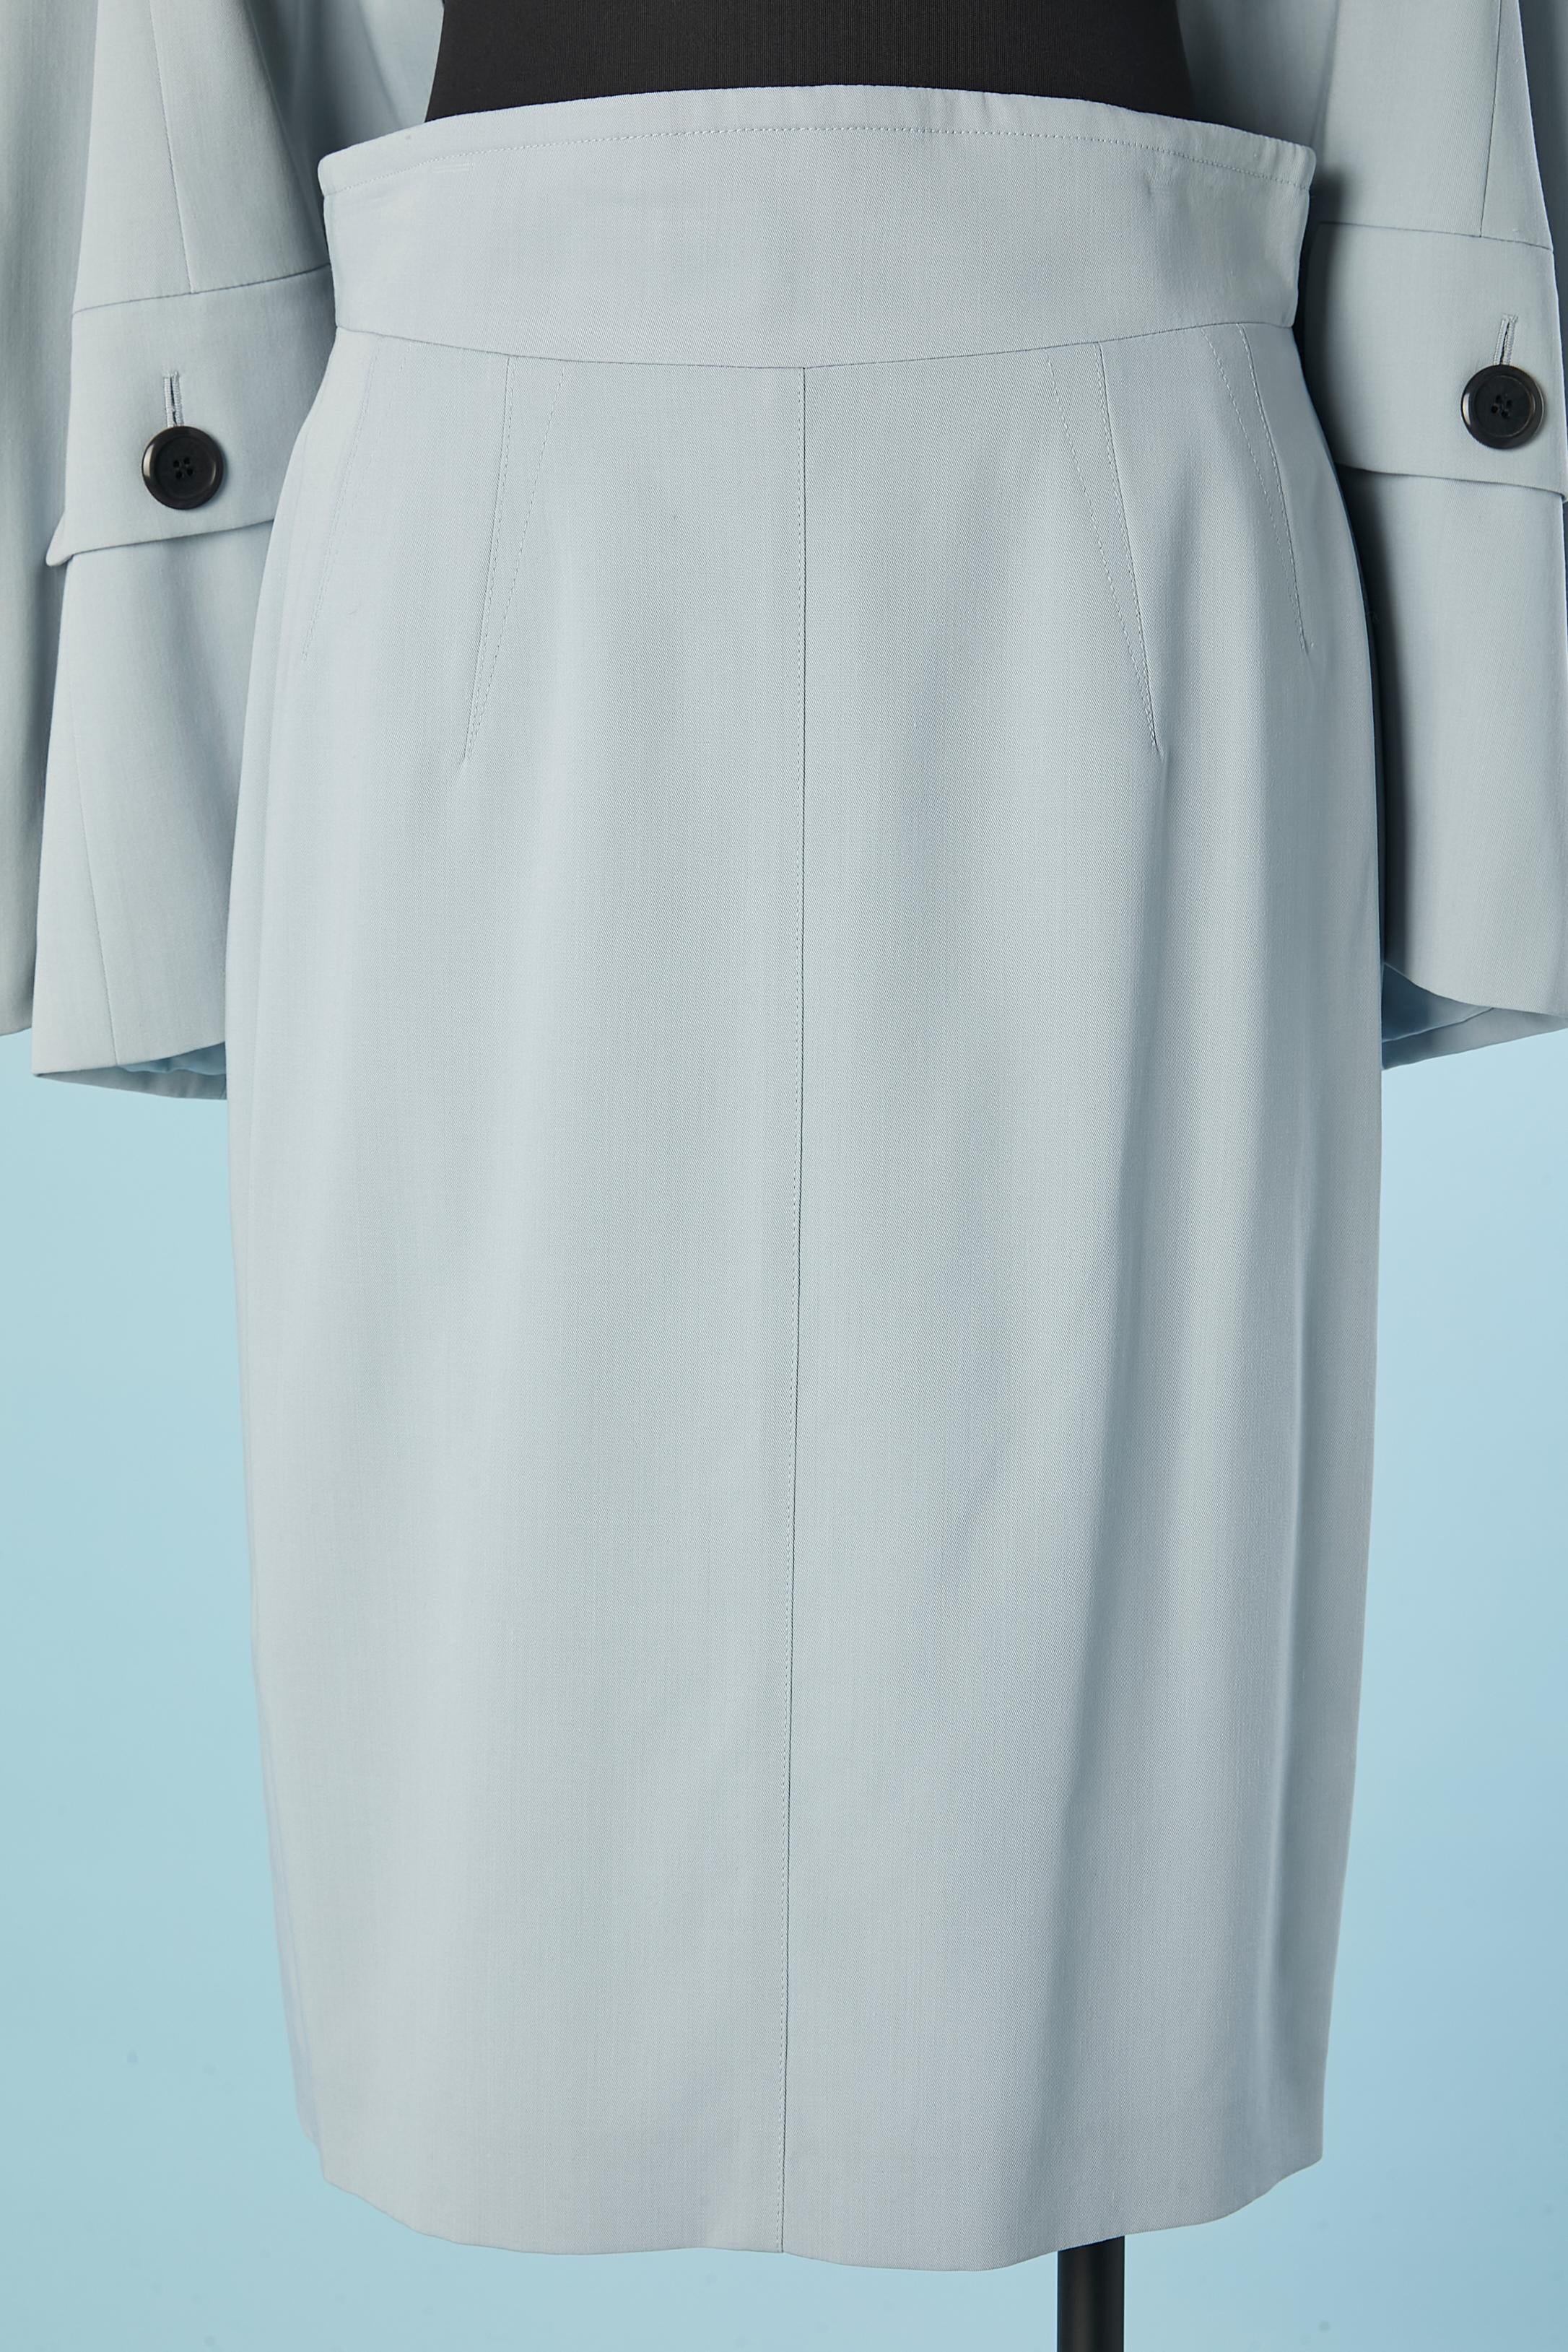 Ice blue skirt -suit with black buttons ESCADA By Margaretha Ley  For Sale 2